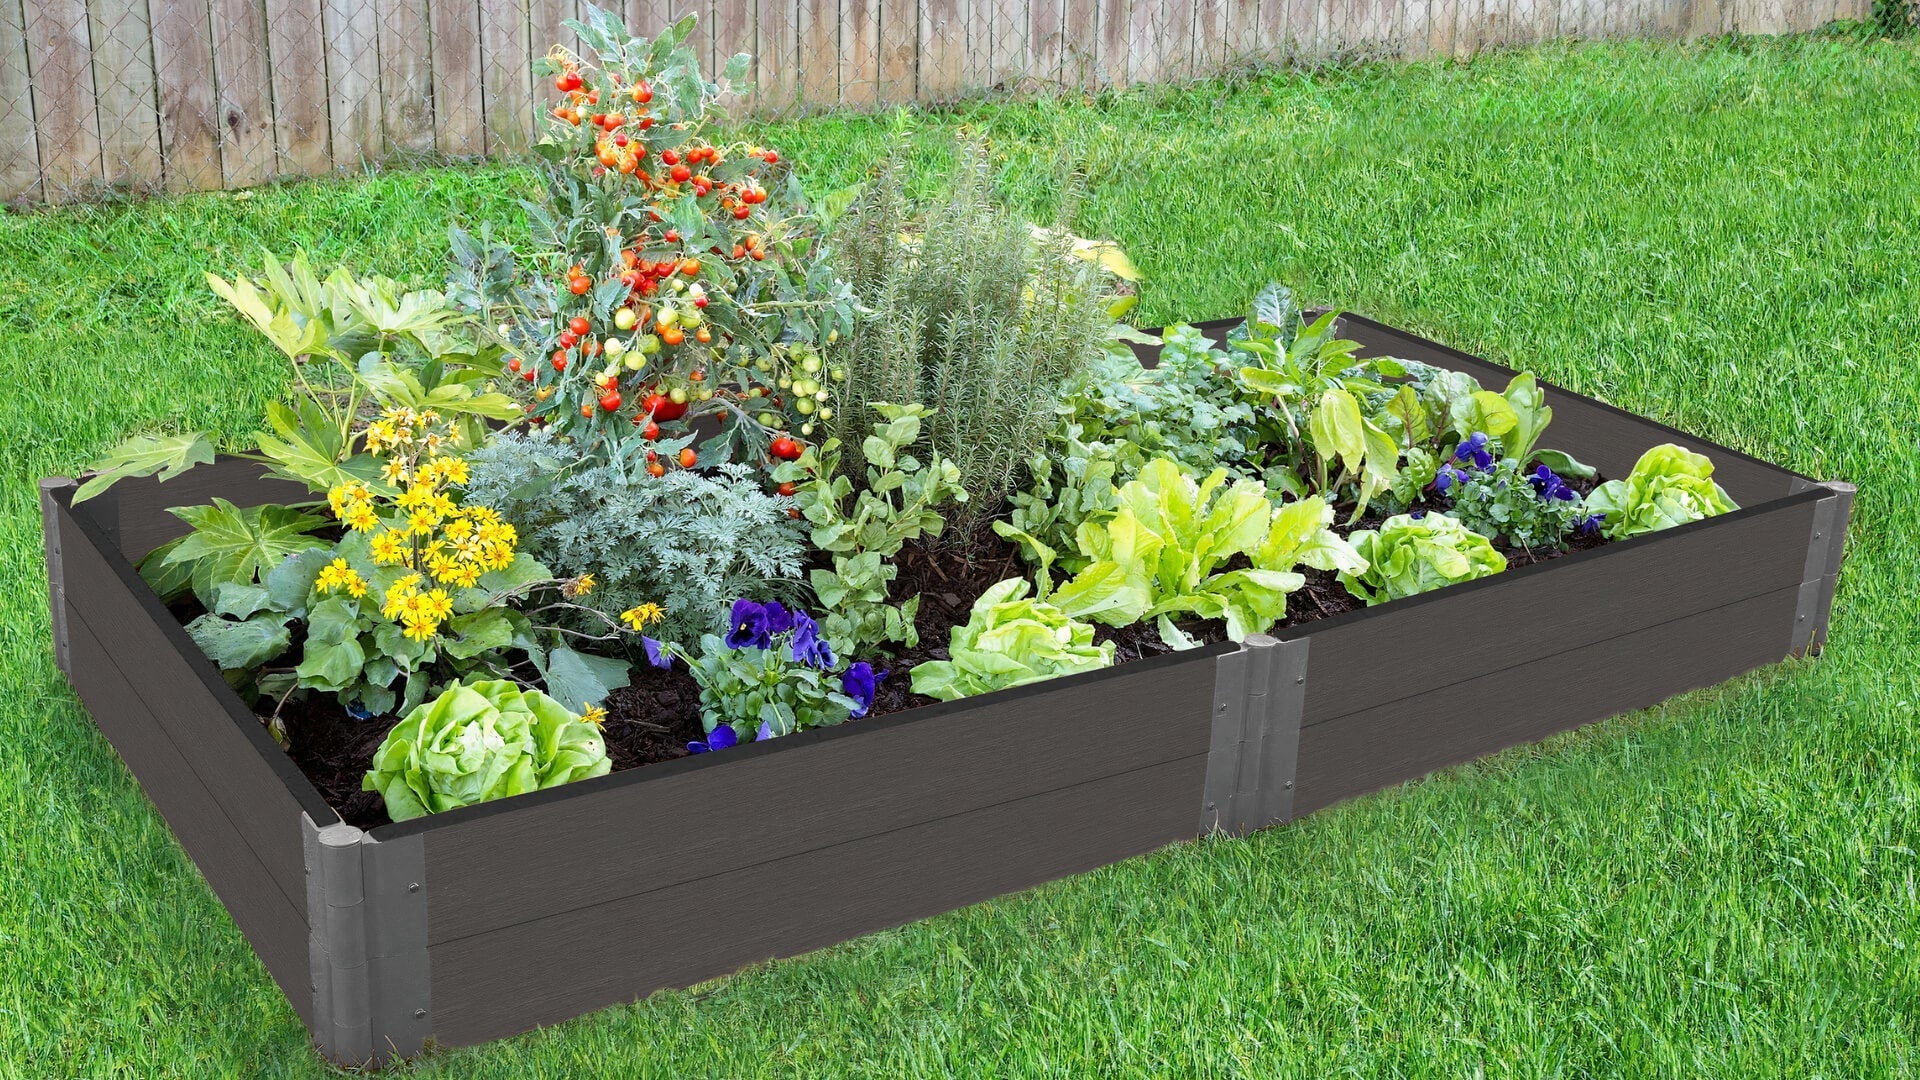 4' x 8' Raised Garden Bed Raised Garden Beds Frame It All Weathered Wood 2